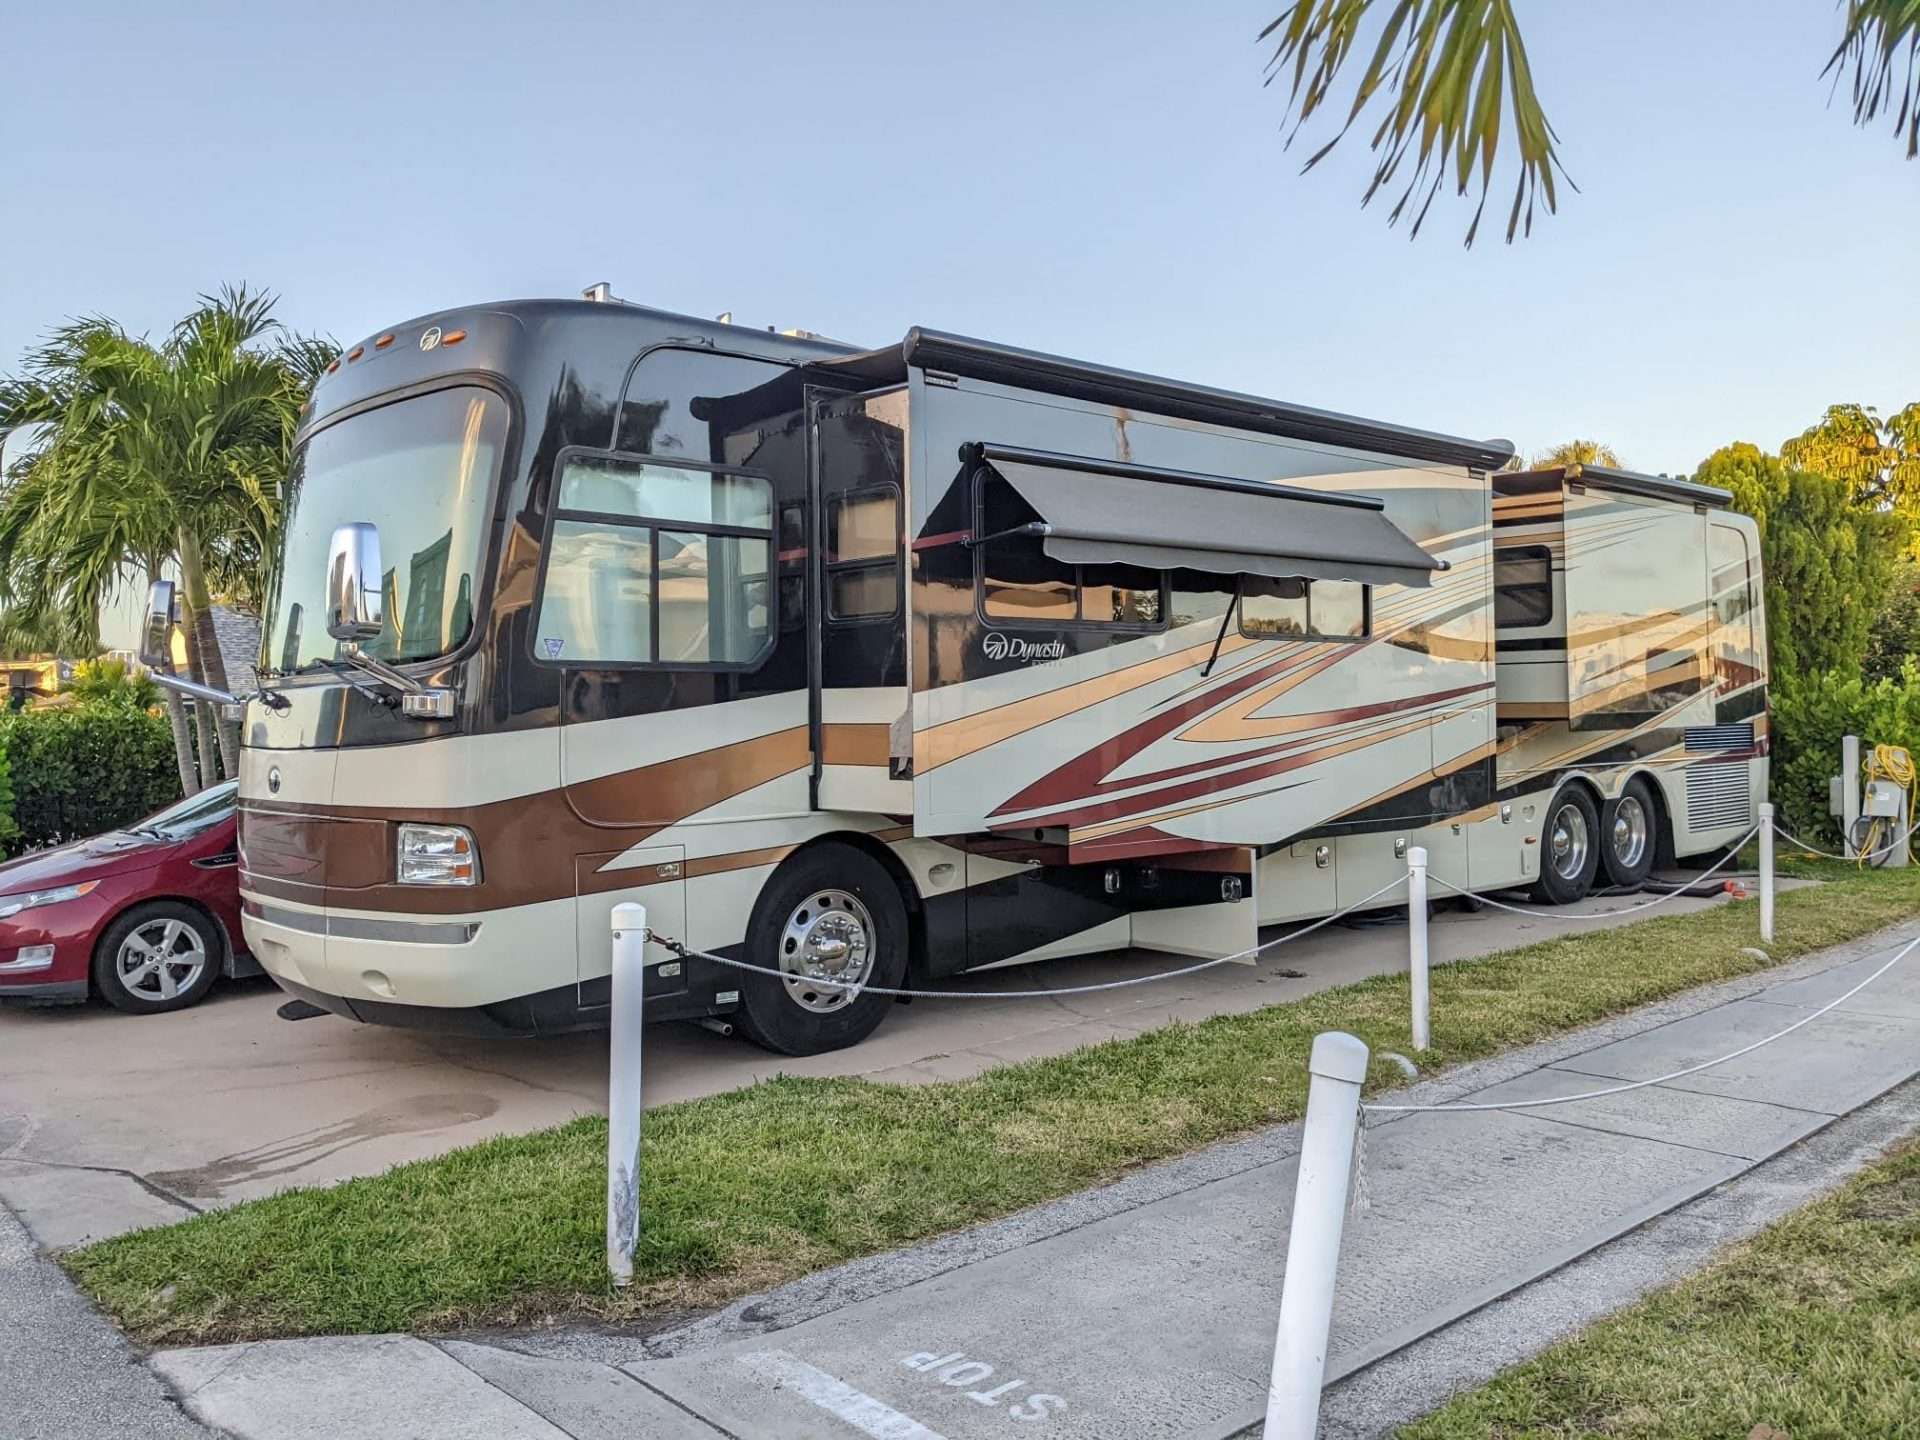 Mortons on the Move Class A RV parked in driveway